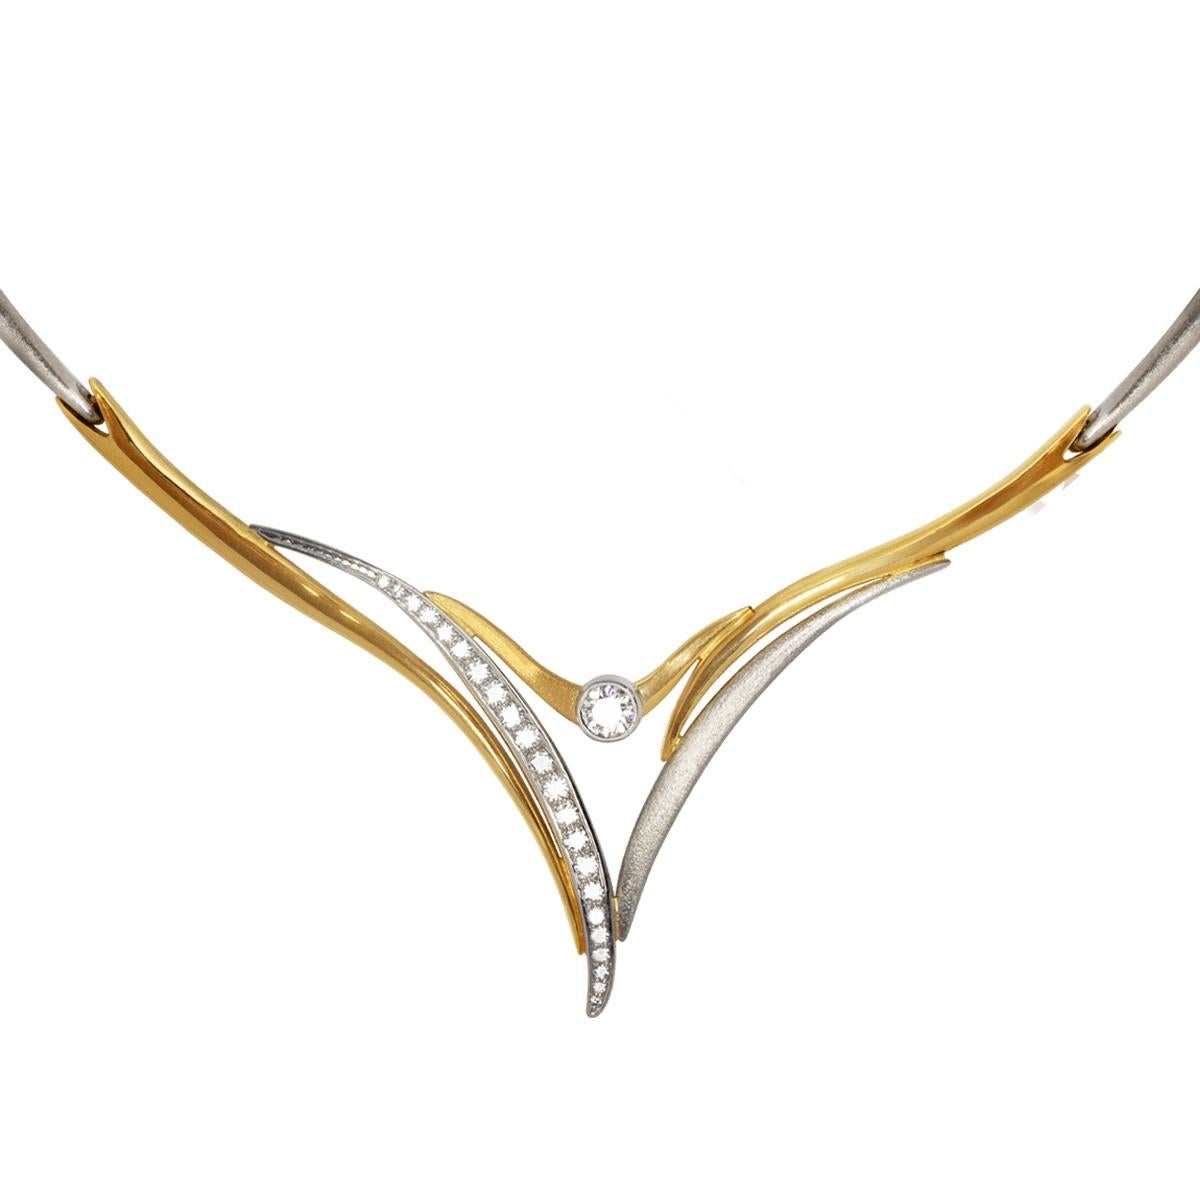 Here is a jewellery design award-winning piece, one of the standouts in our collection. When you hear mentioned museum-grade jewellery, this is what they are talking about - an astoundingly beautiful design that is not just a stunning pendant but